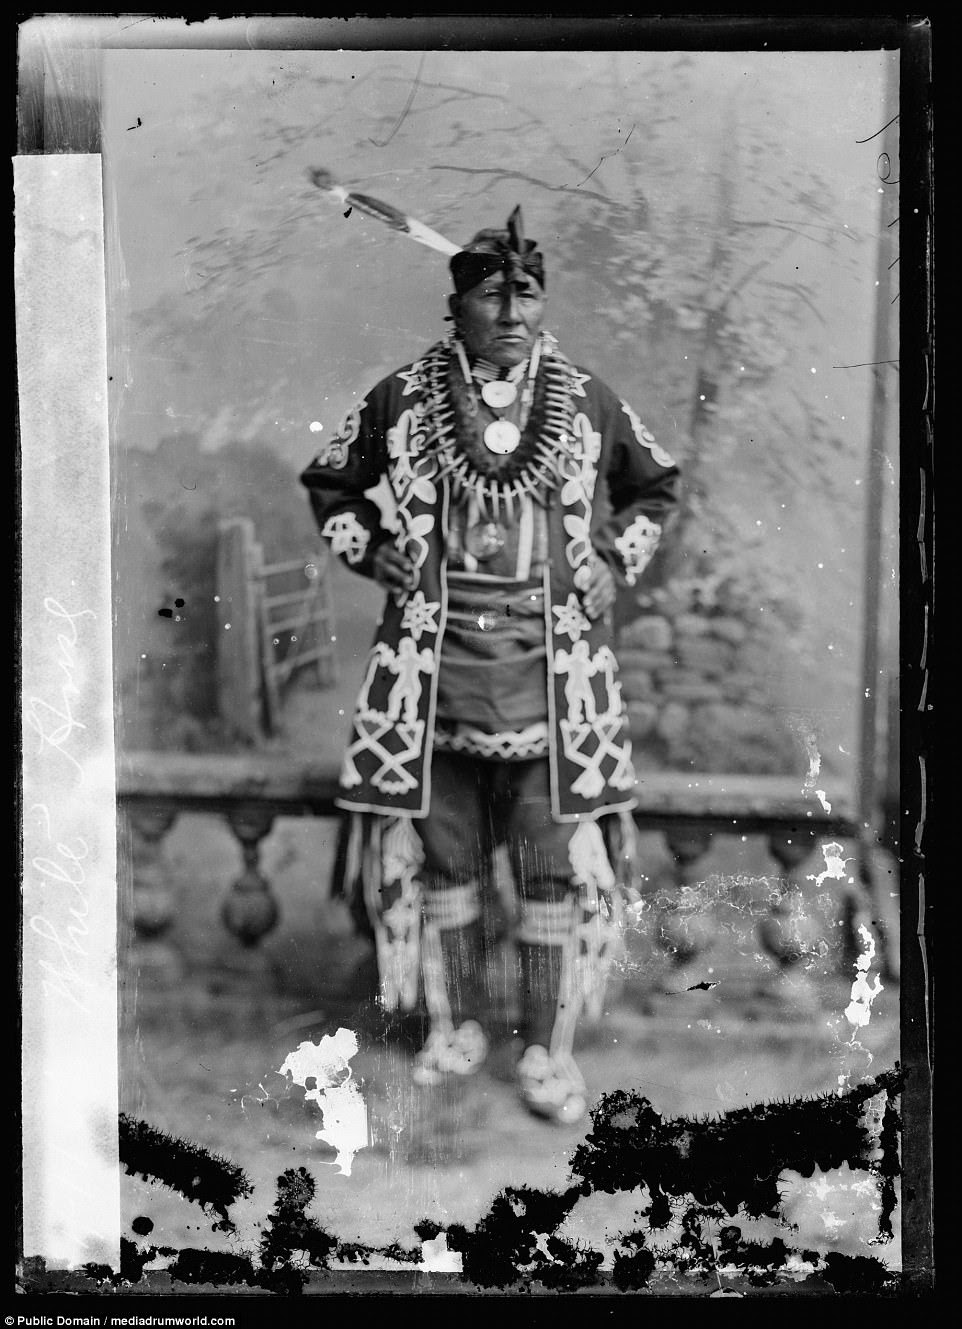 White Horse, chief of the Kiowa people, in 1894. Most of the pictures were taken between 1865 and 1915